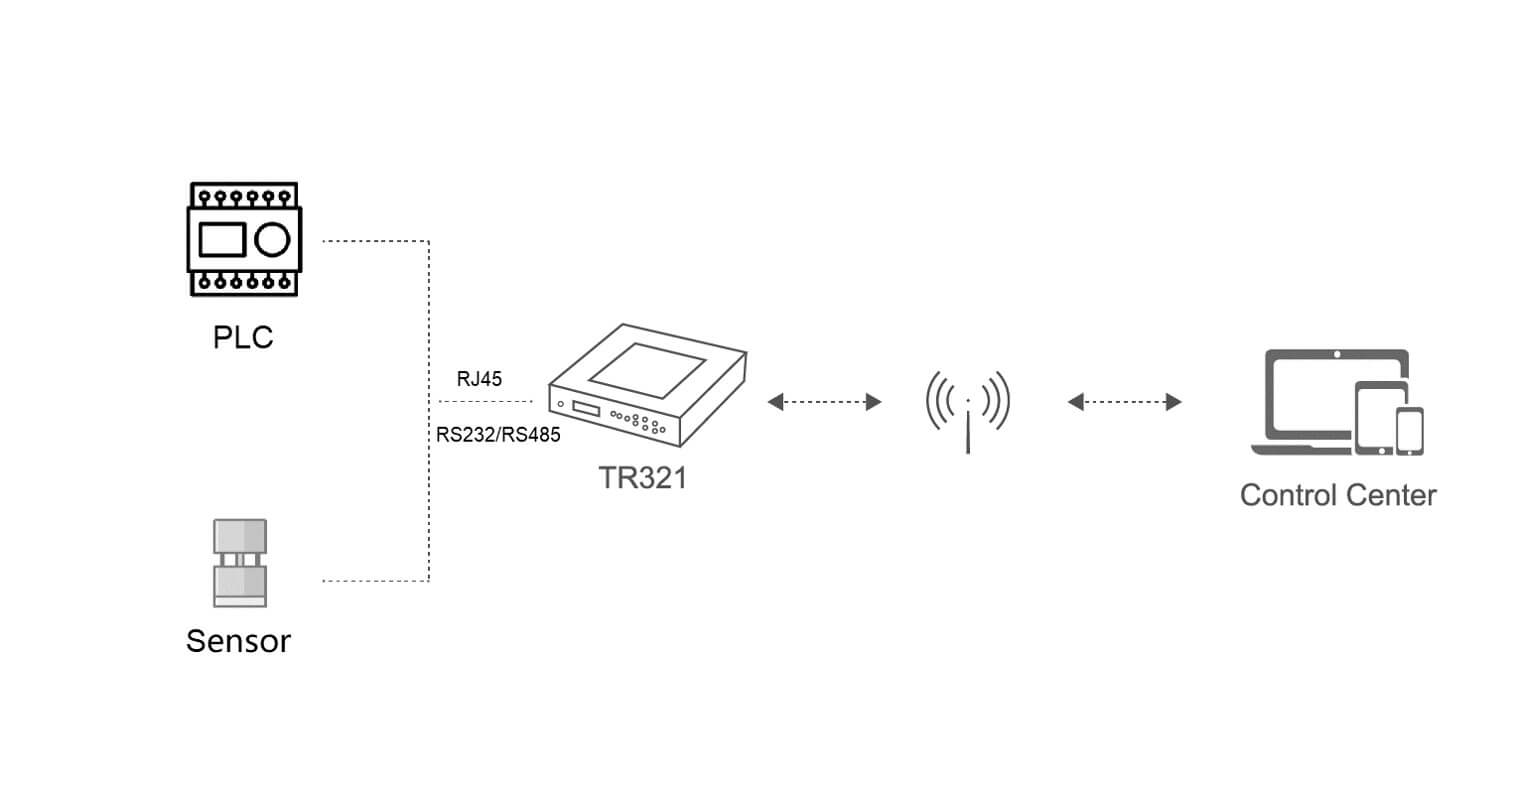 Diagram of PLC controlled by IoT Router TR321